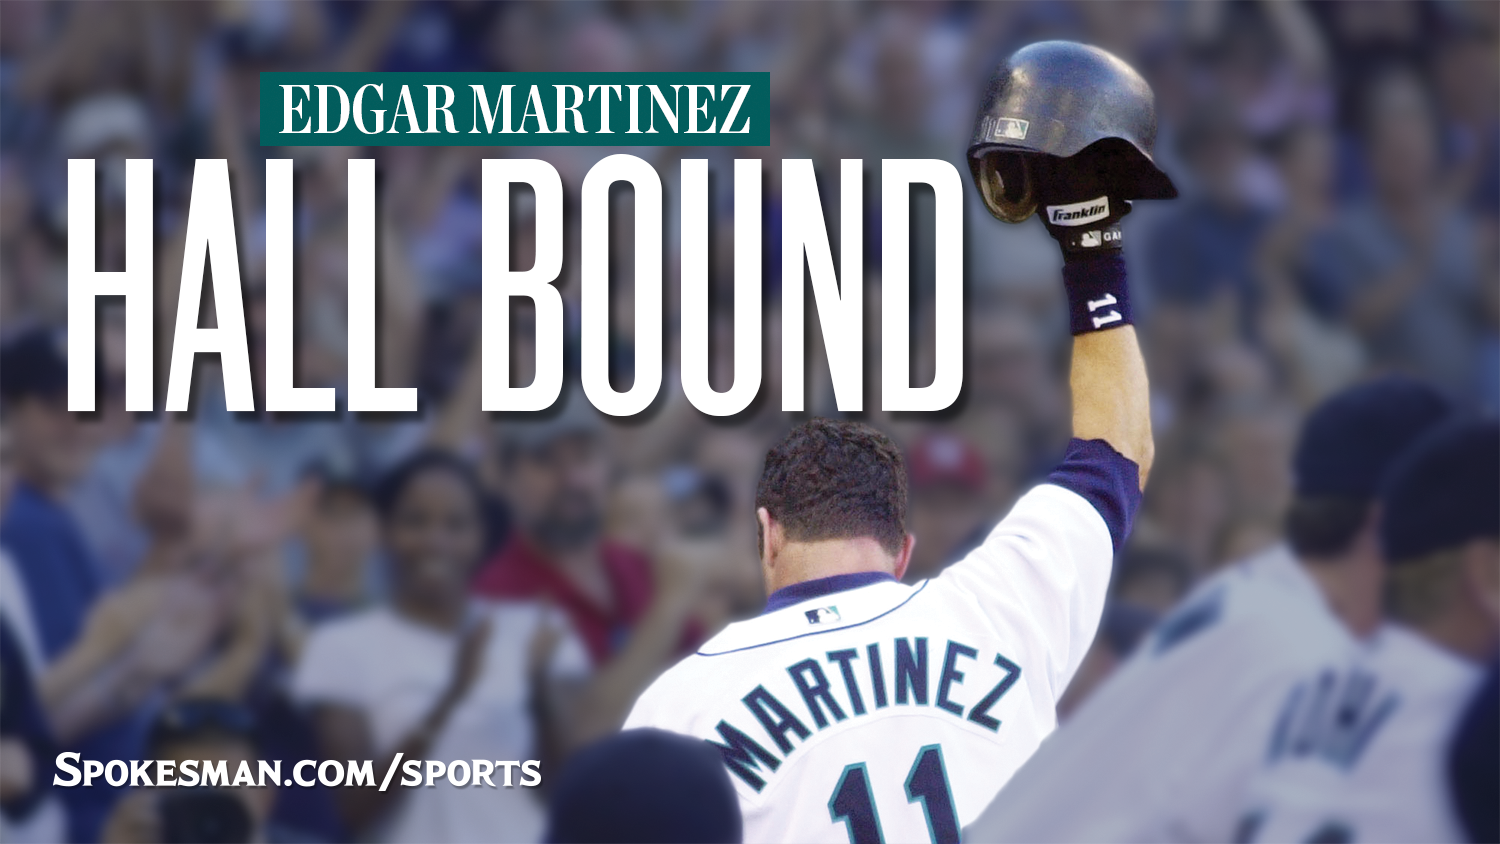 In his final year Edgar Martinez gets call from Cooperstown - The Columbian